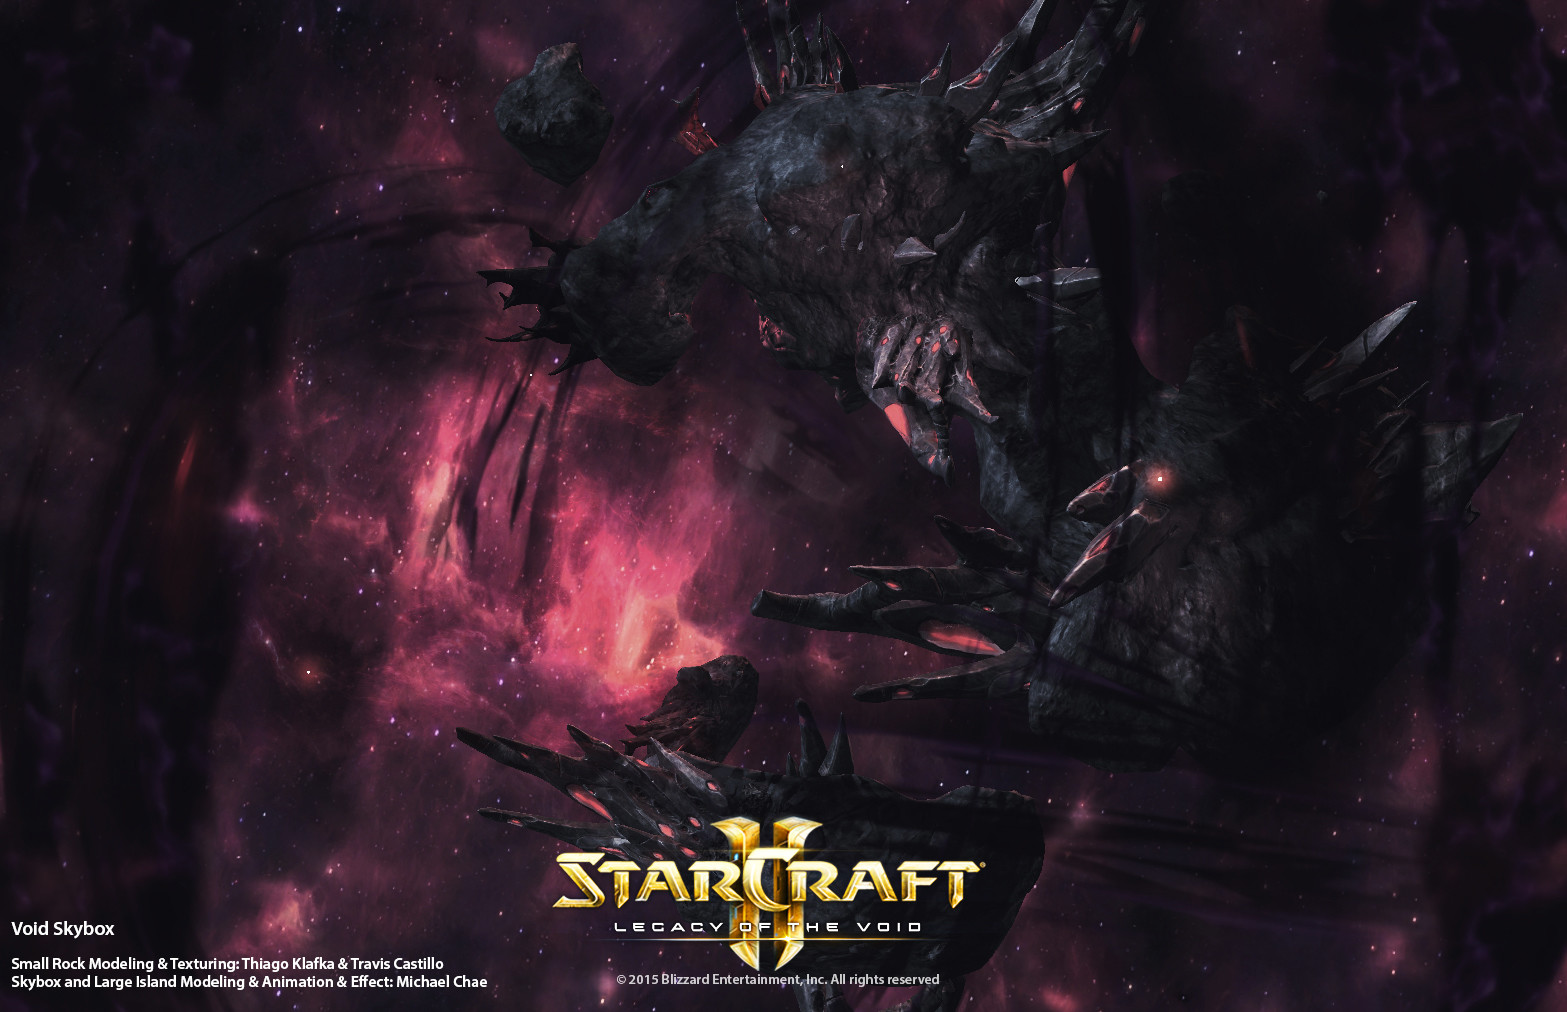 Voices of the void 0.6 3b. STARCRAFT 2 Legacy of the Void заставка. Огонь Небесный старкрафт 2 биомасса. Void Art. The Void 2016.